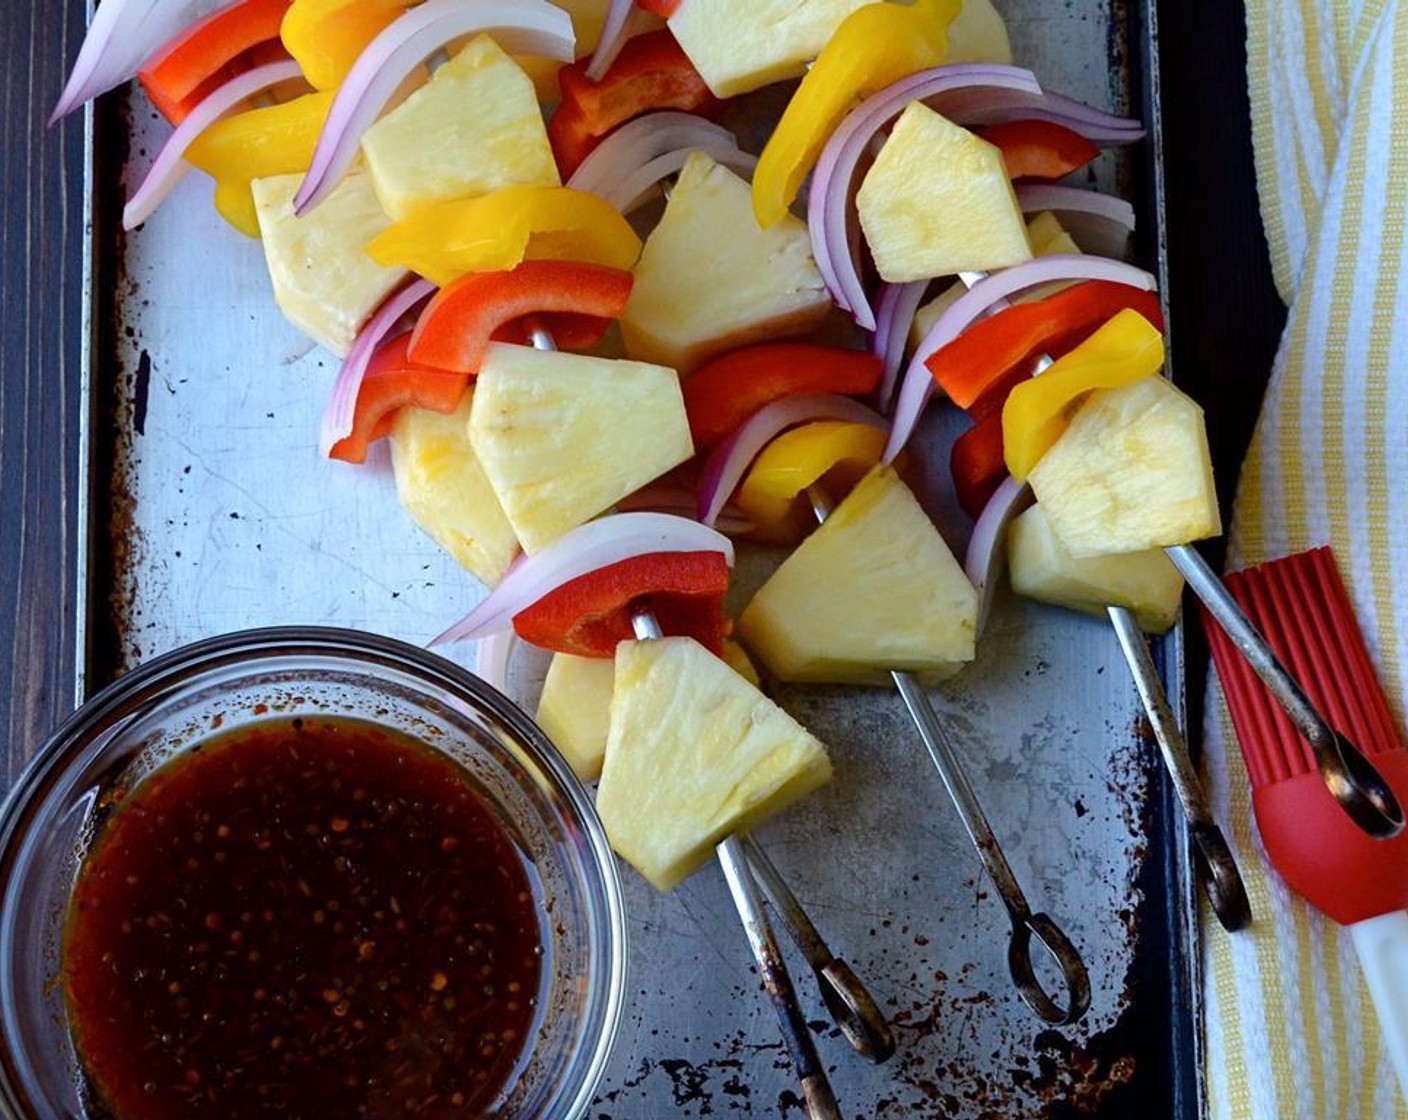 step 5 Meanwhile, alternate threading the Fresh Pineapple Chunks (2 cups), Red Bell Pepper (1), Yellow Bell Pepper (1), and Red Onion (1/2) onto metal or pre-soaked wooden skewers.